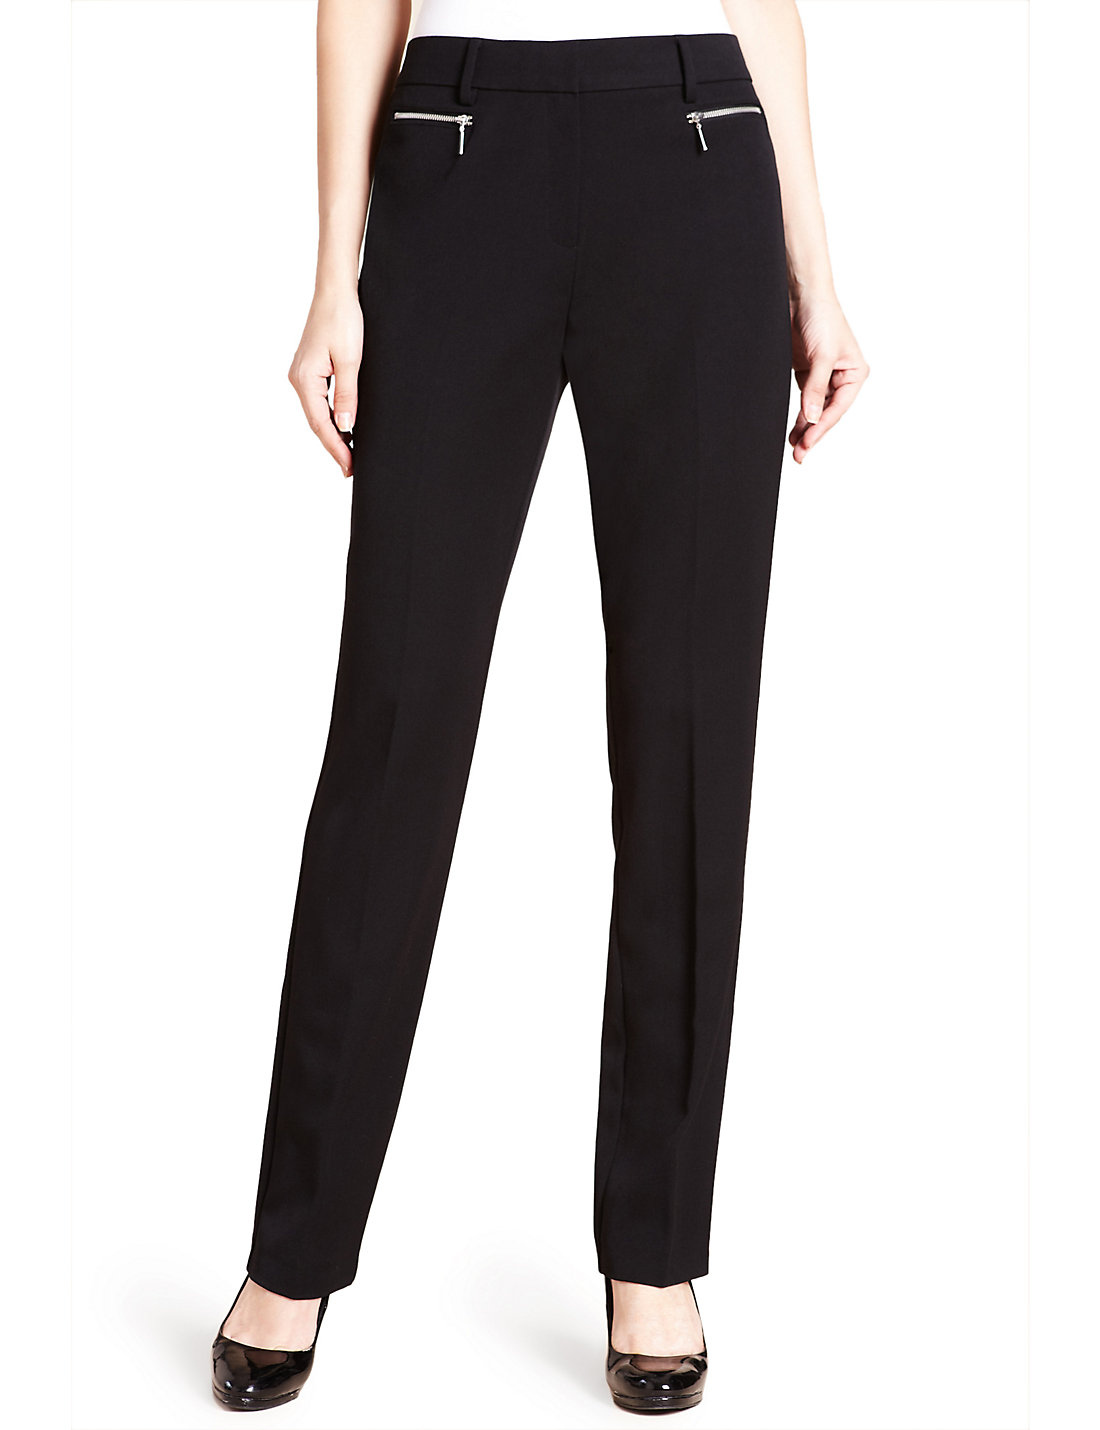 Marks and Spencer - - M&5 BLACK Slim Leg Zip Pocket Trousers - Size 8 to 18